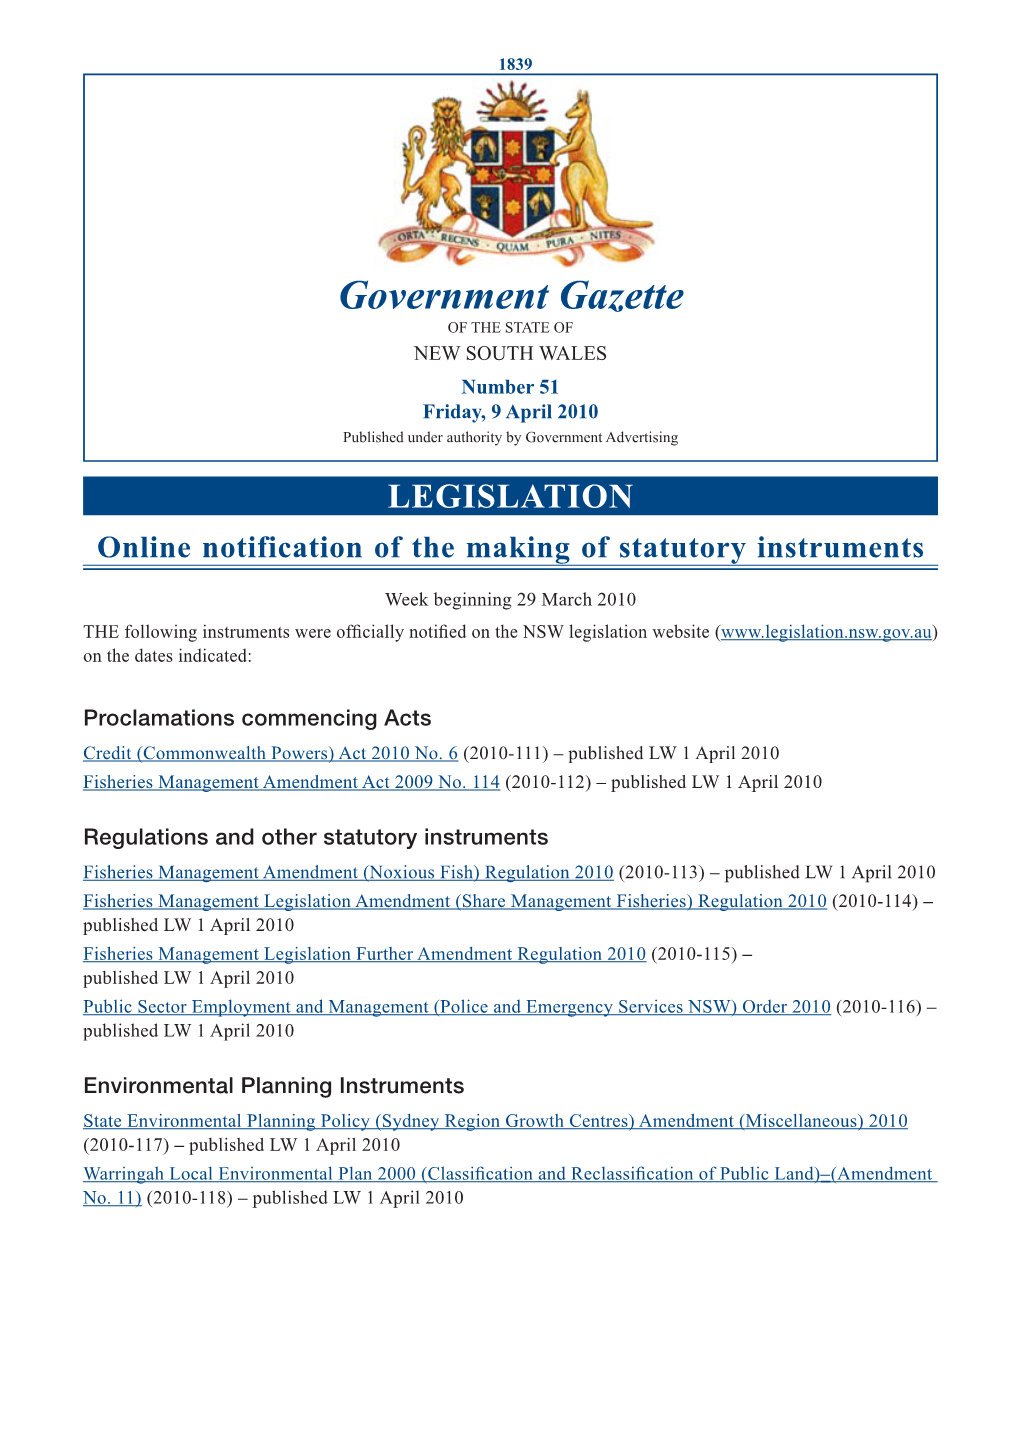 Government Gazette of the STATE of NEW SOUTH WALES Number 51 Friday, 9 April 2010 Published Under Authority by Government Advertising